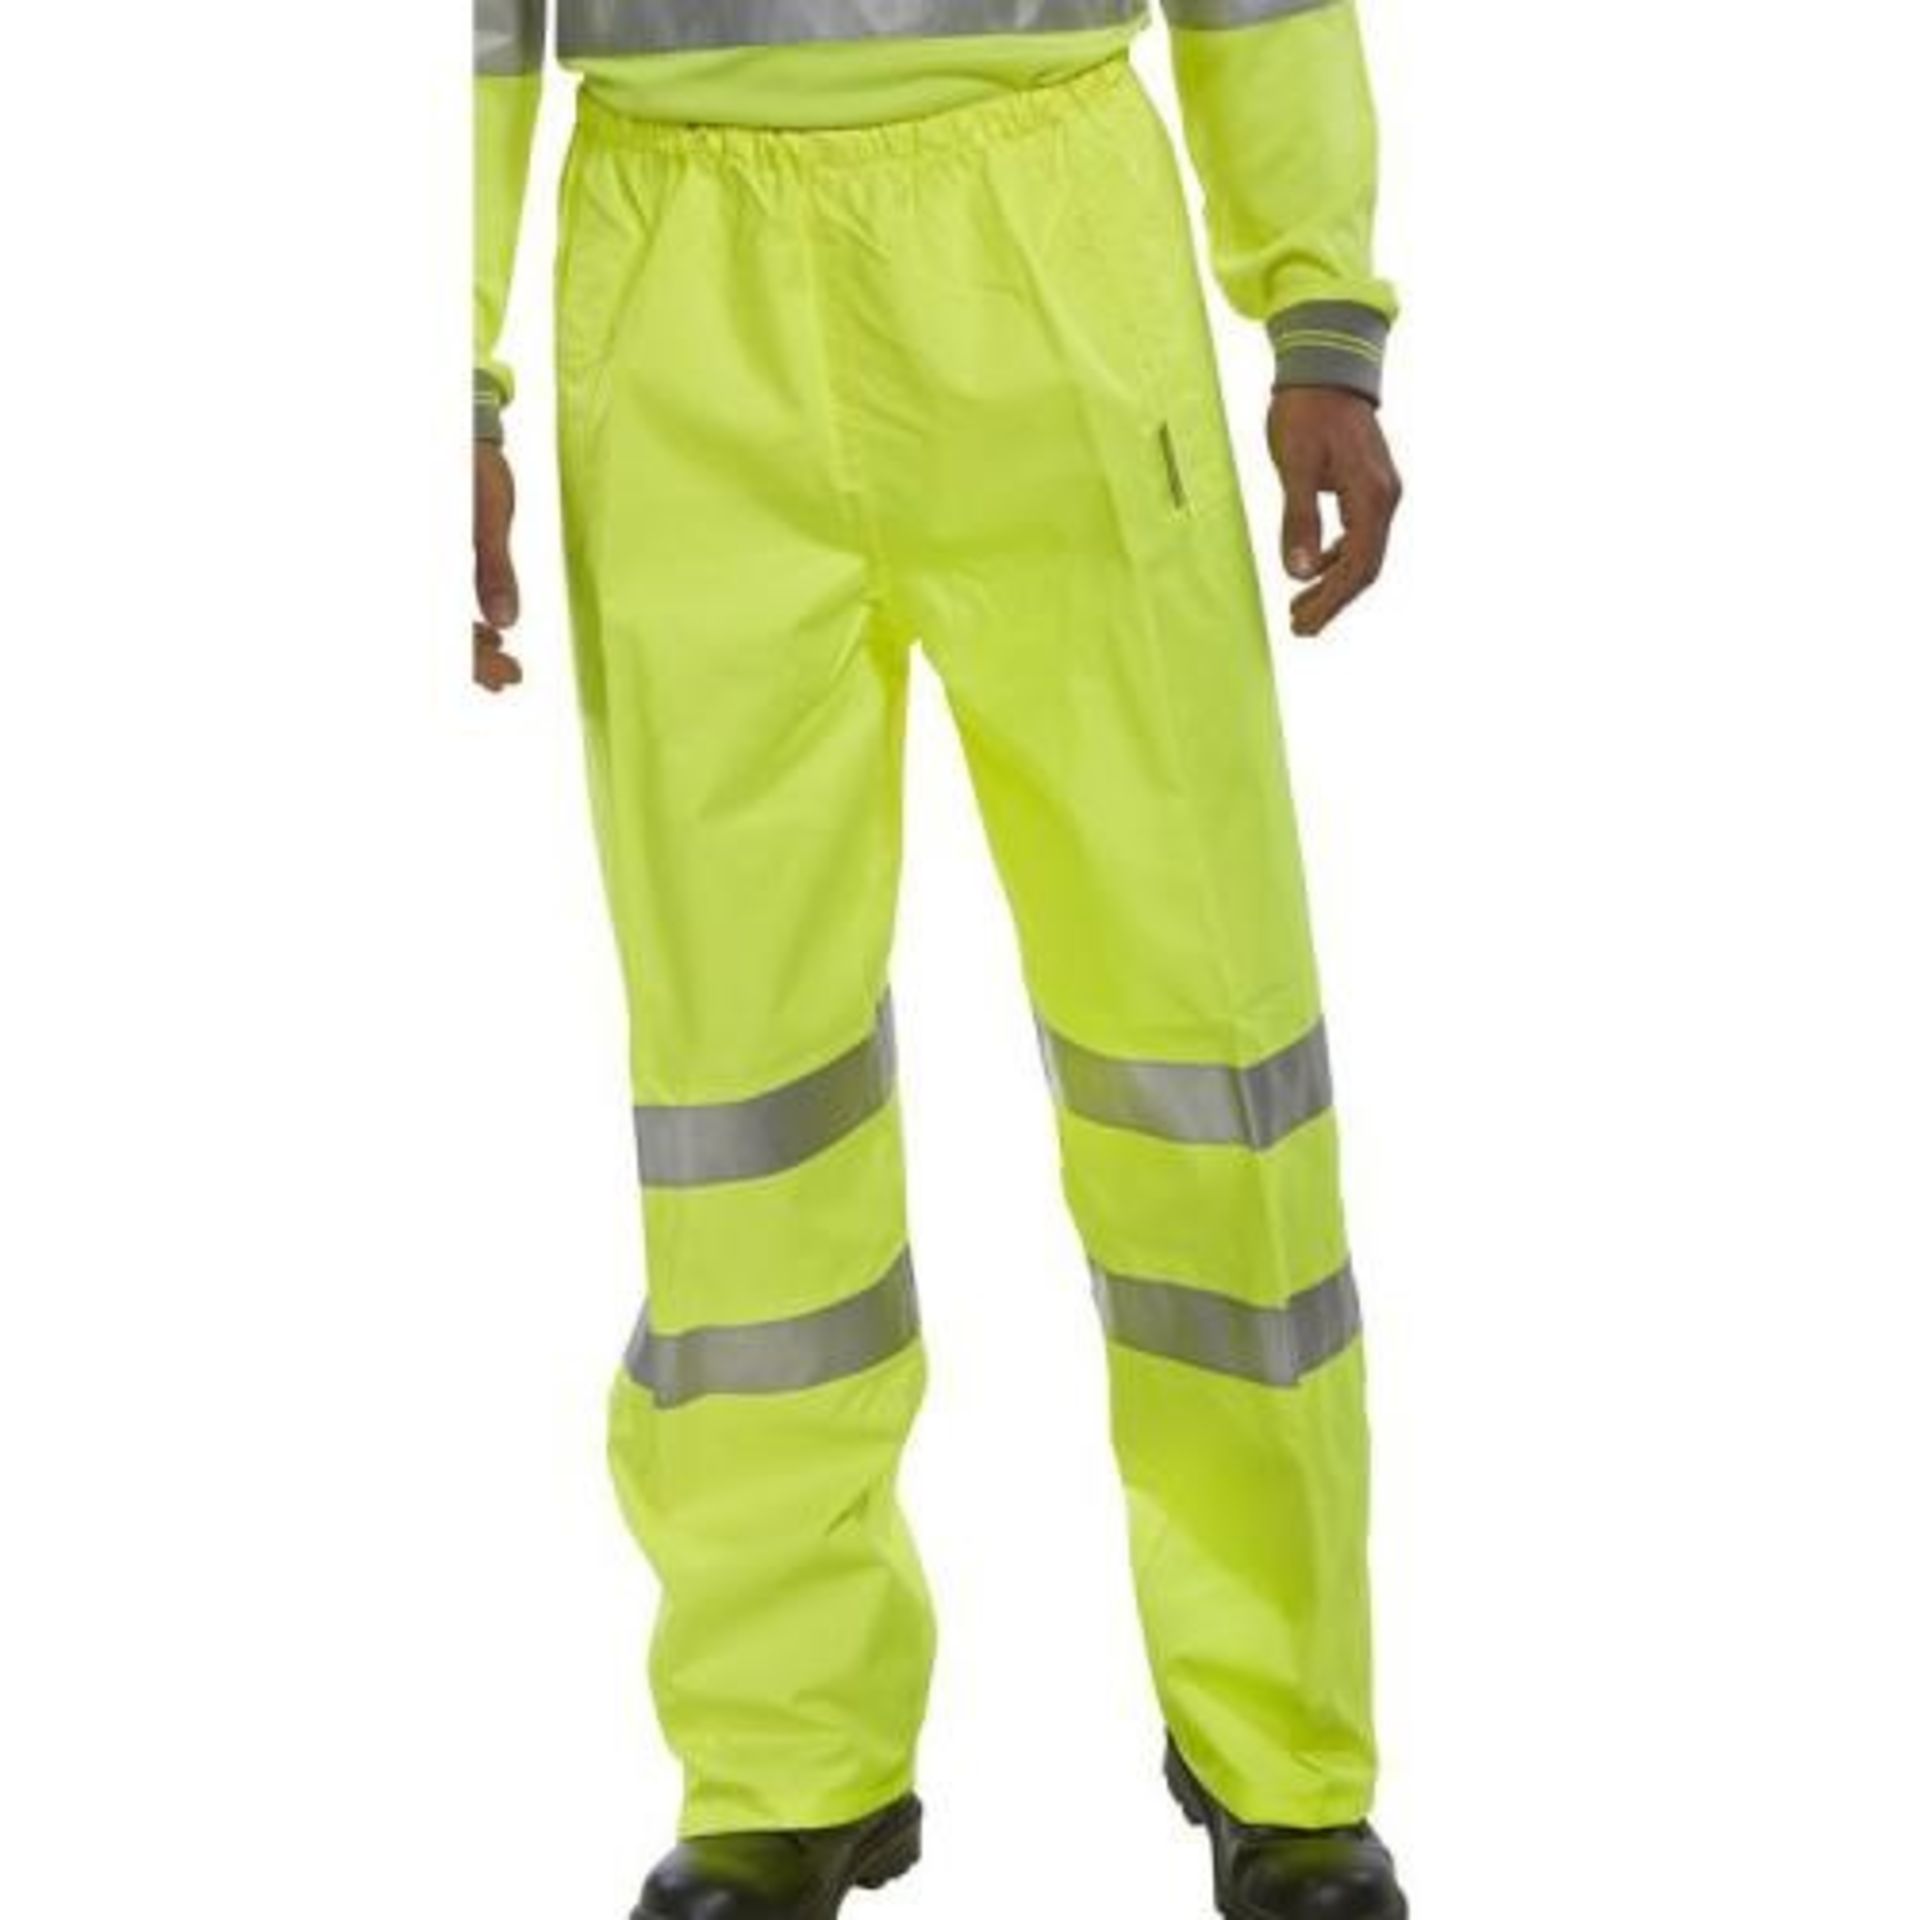 1 LOT TO CONTAIN 5 AS NEW BAGGED B-SEEN HI-VIS TROUSERS IN YELLOW / SIZE - XL / PN - NPN / RRP £95.